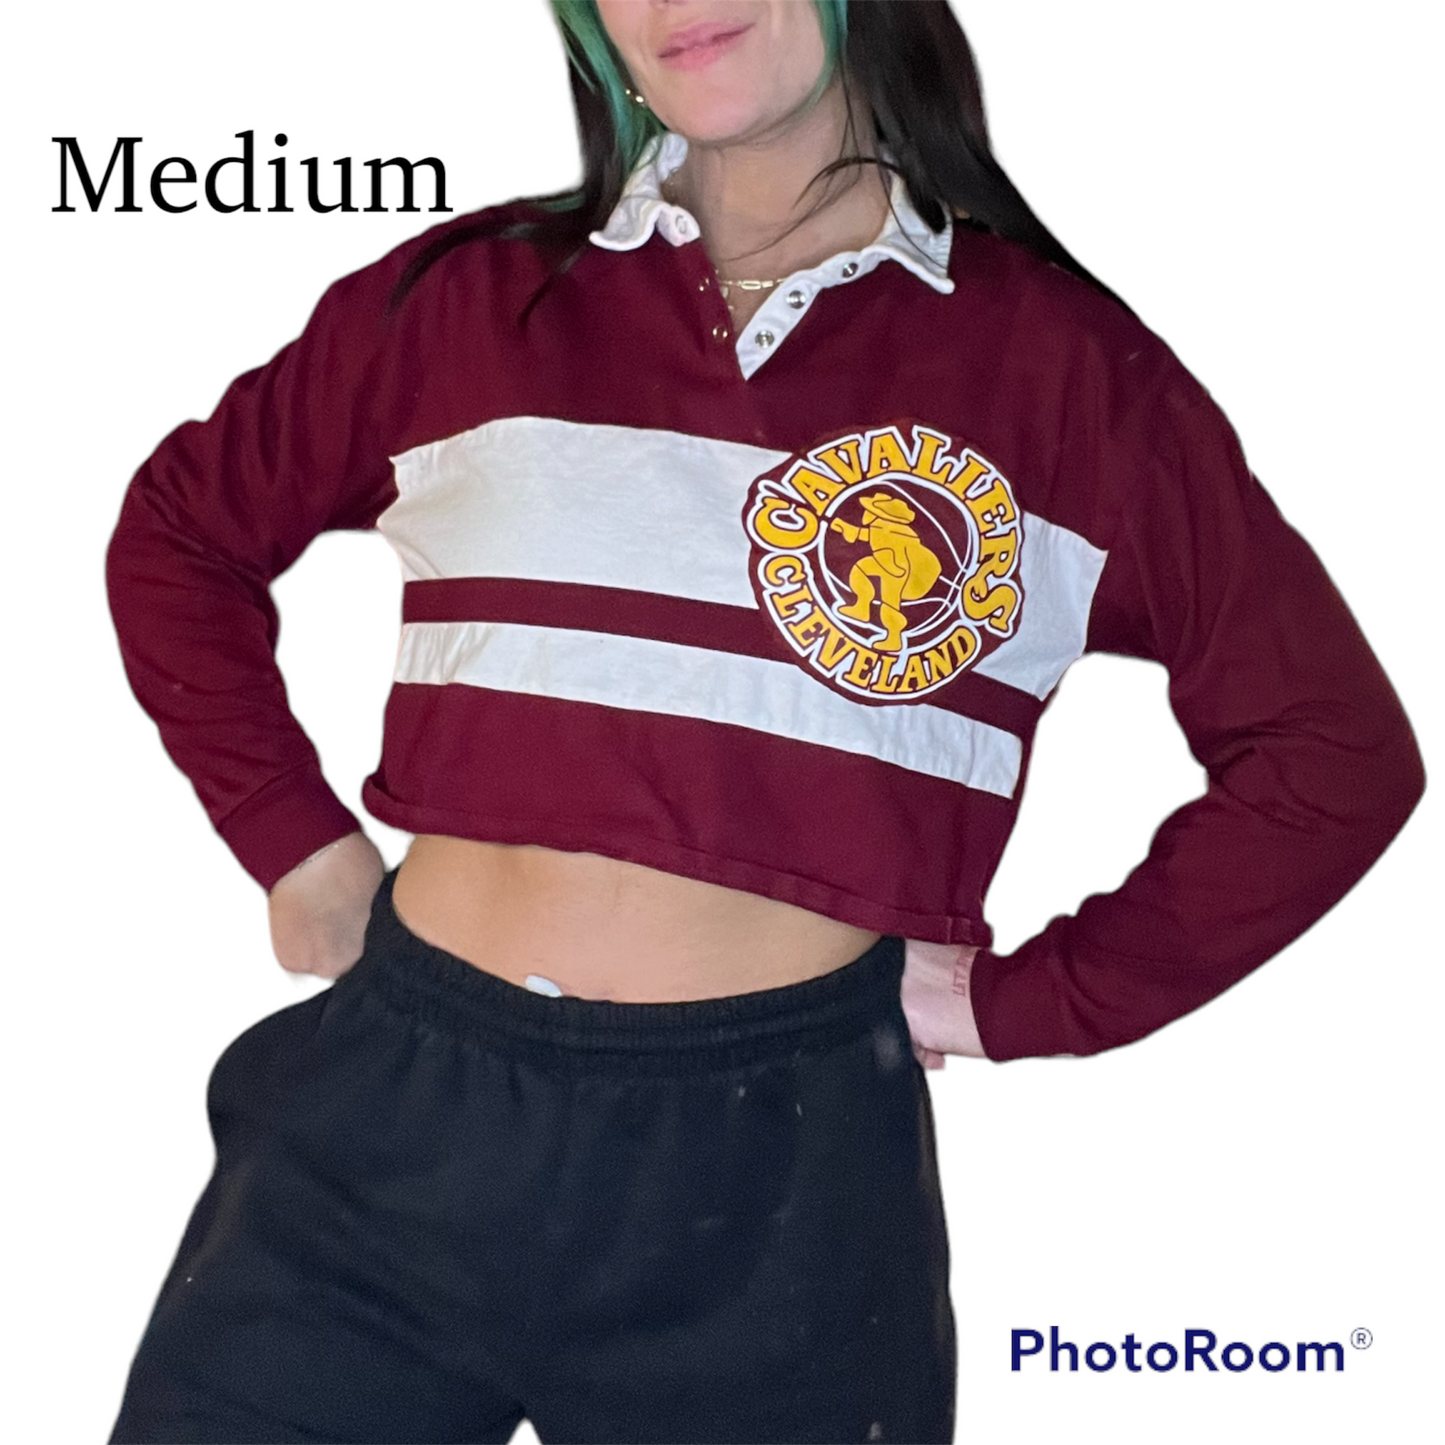 Cavaliers rugby top